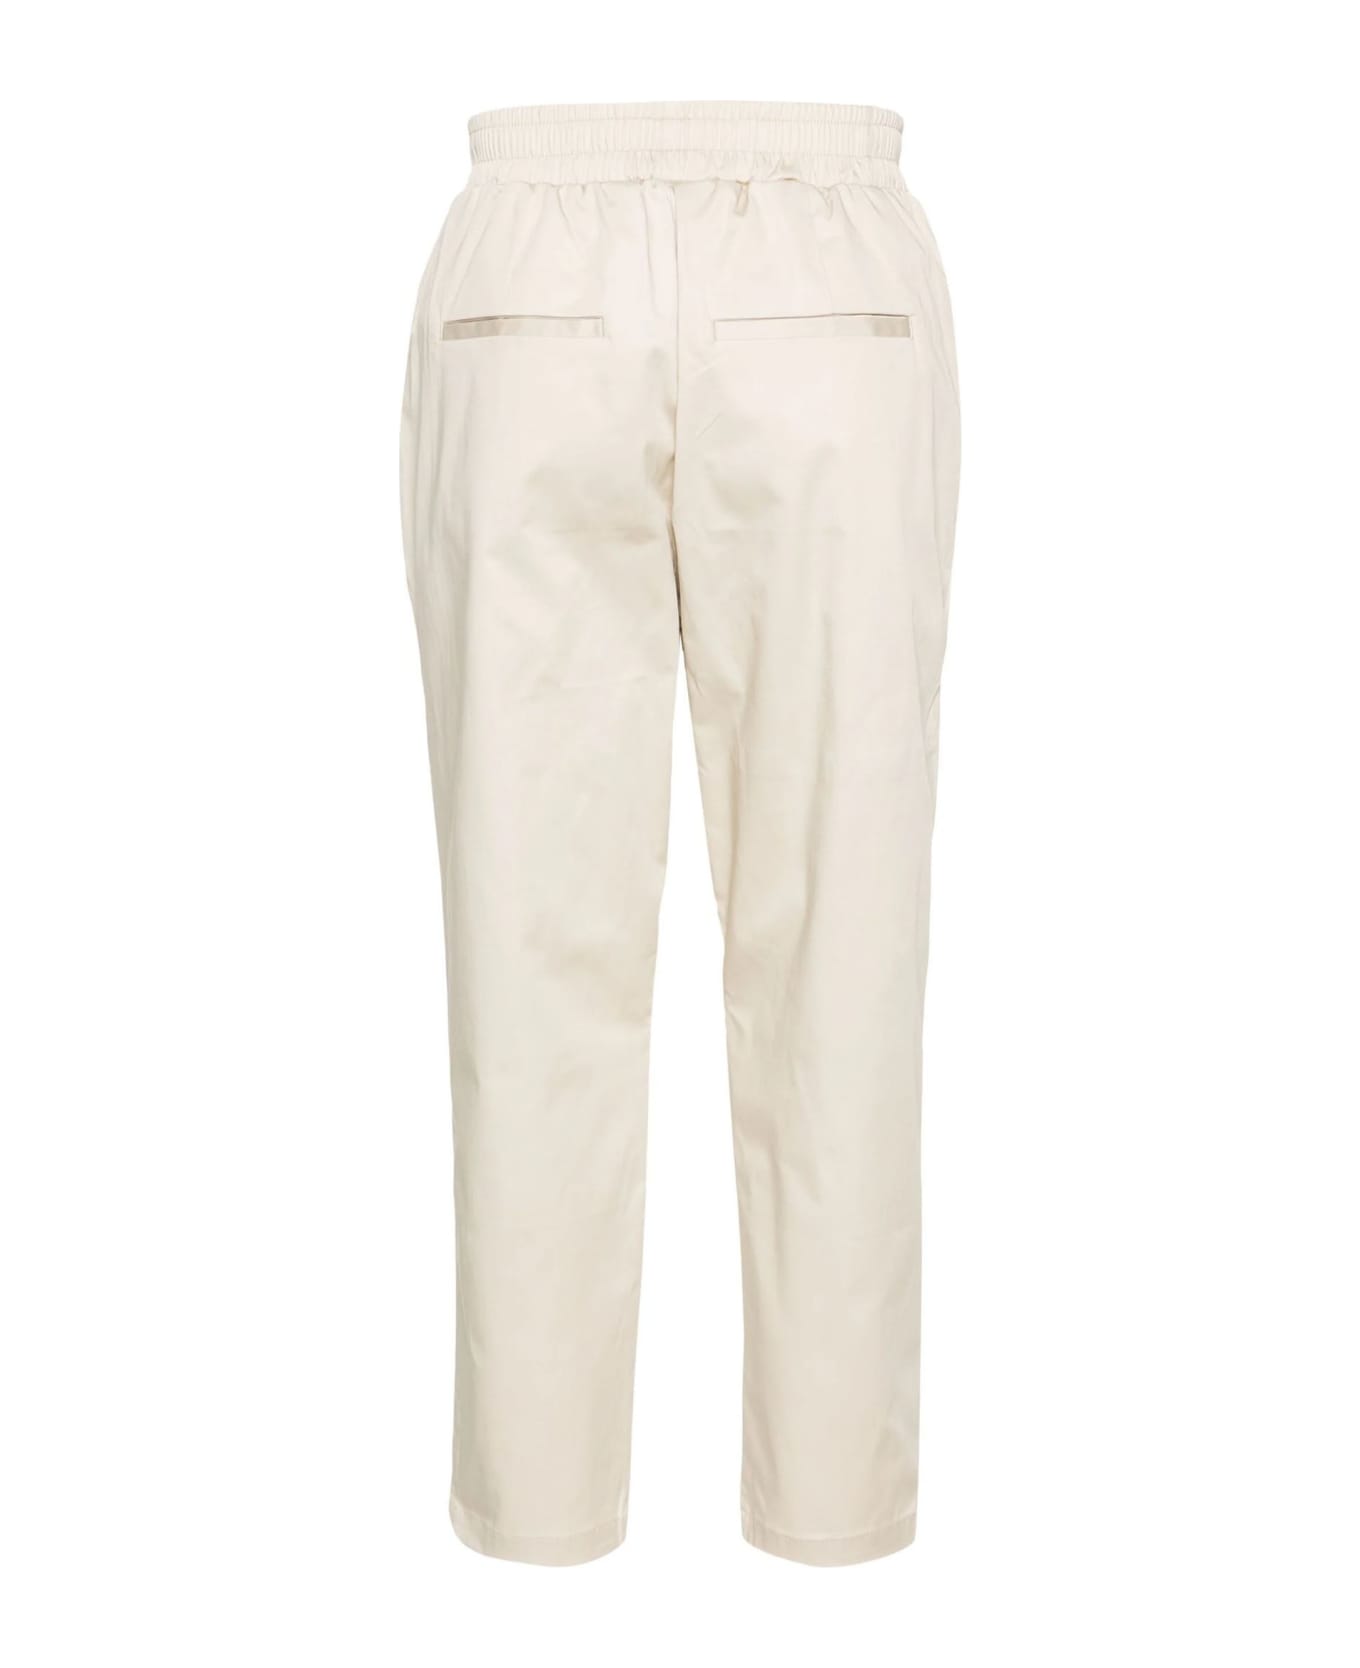 Family First Milano Family First Trousers White - White ボトムス